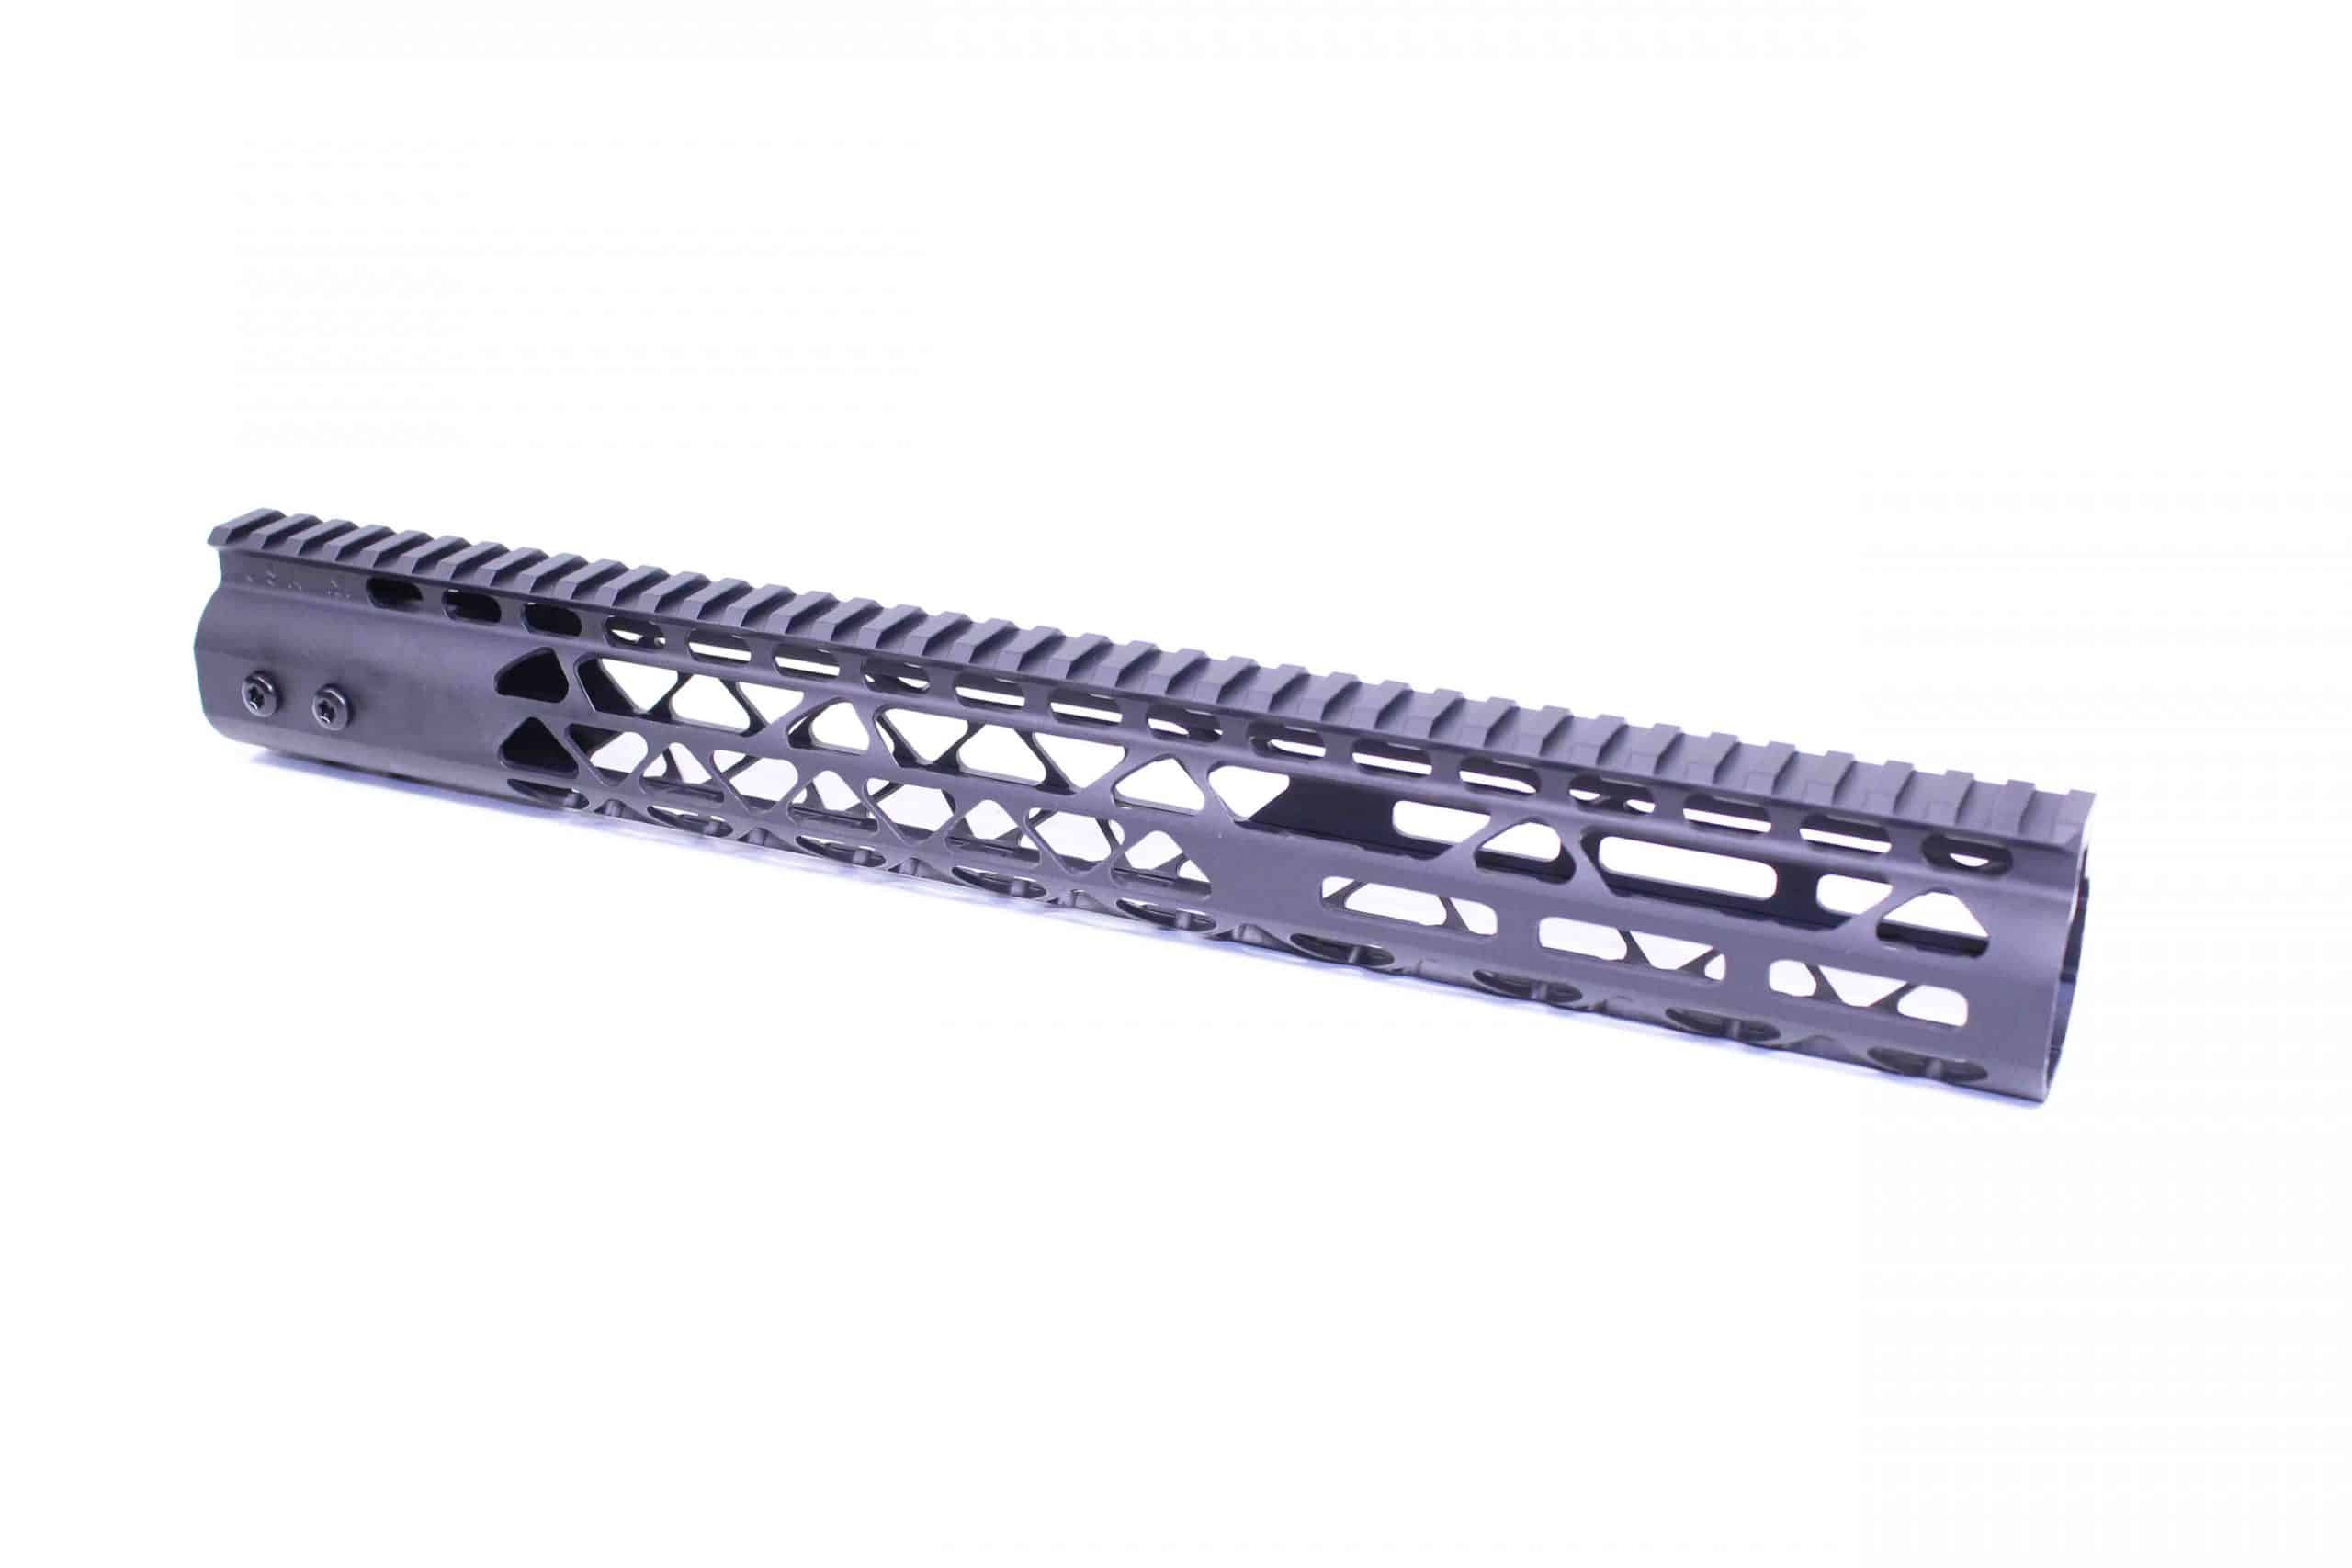 15" Air Lite Series M-LOK Free Floating Handguard With Monolithic Top Rail (Anodized Black)